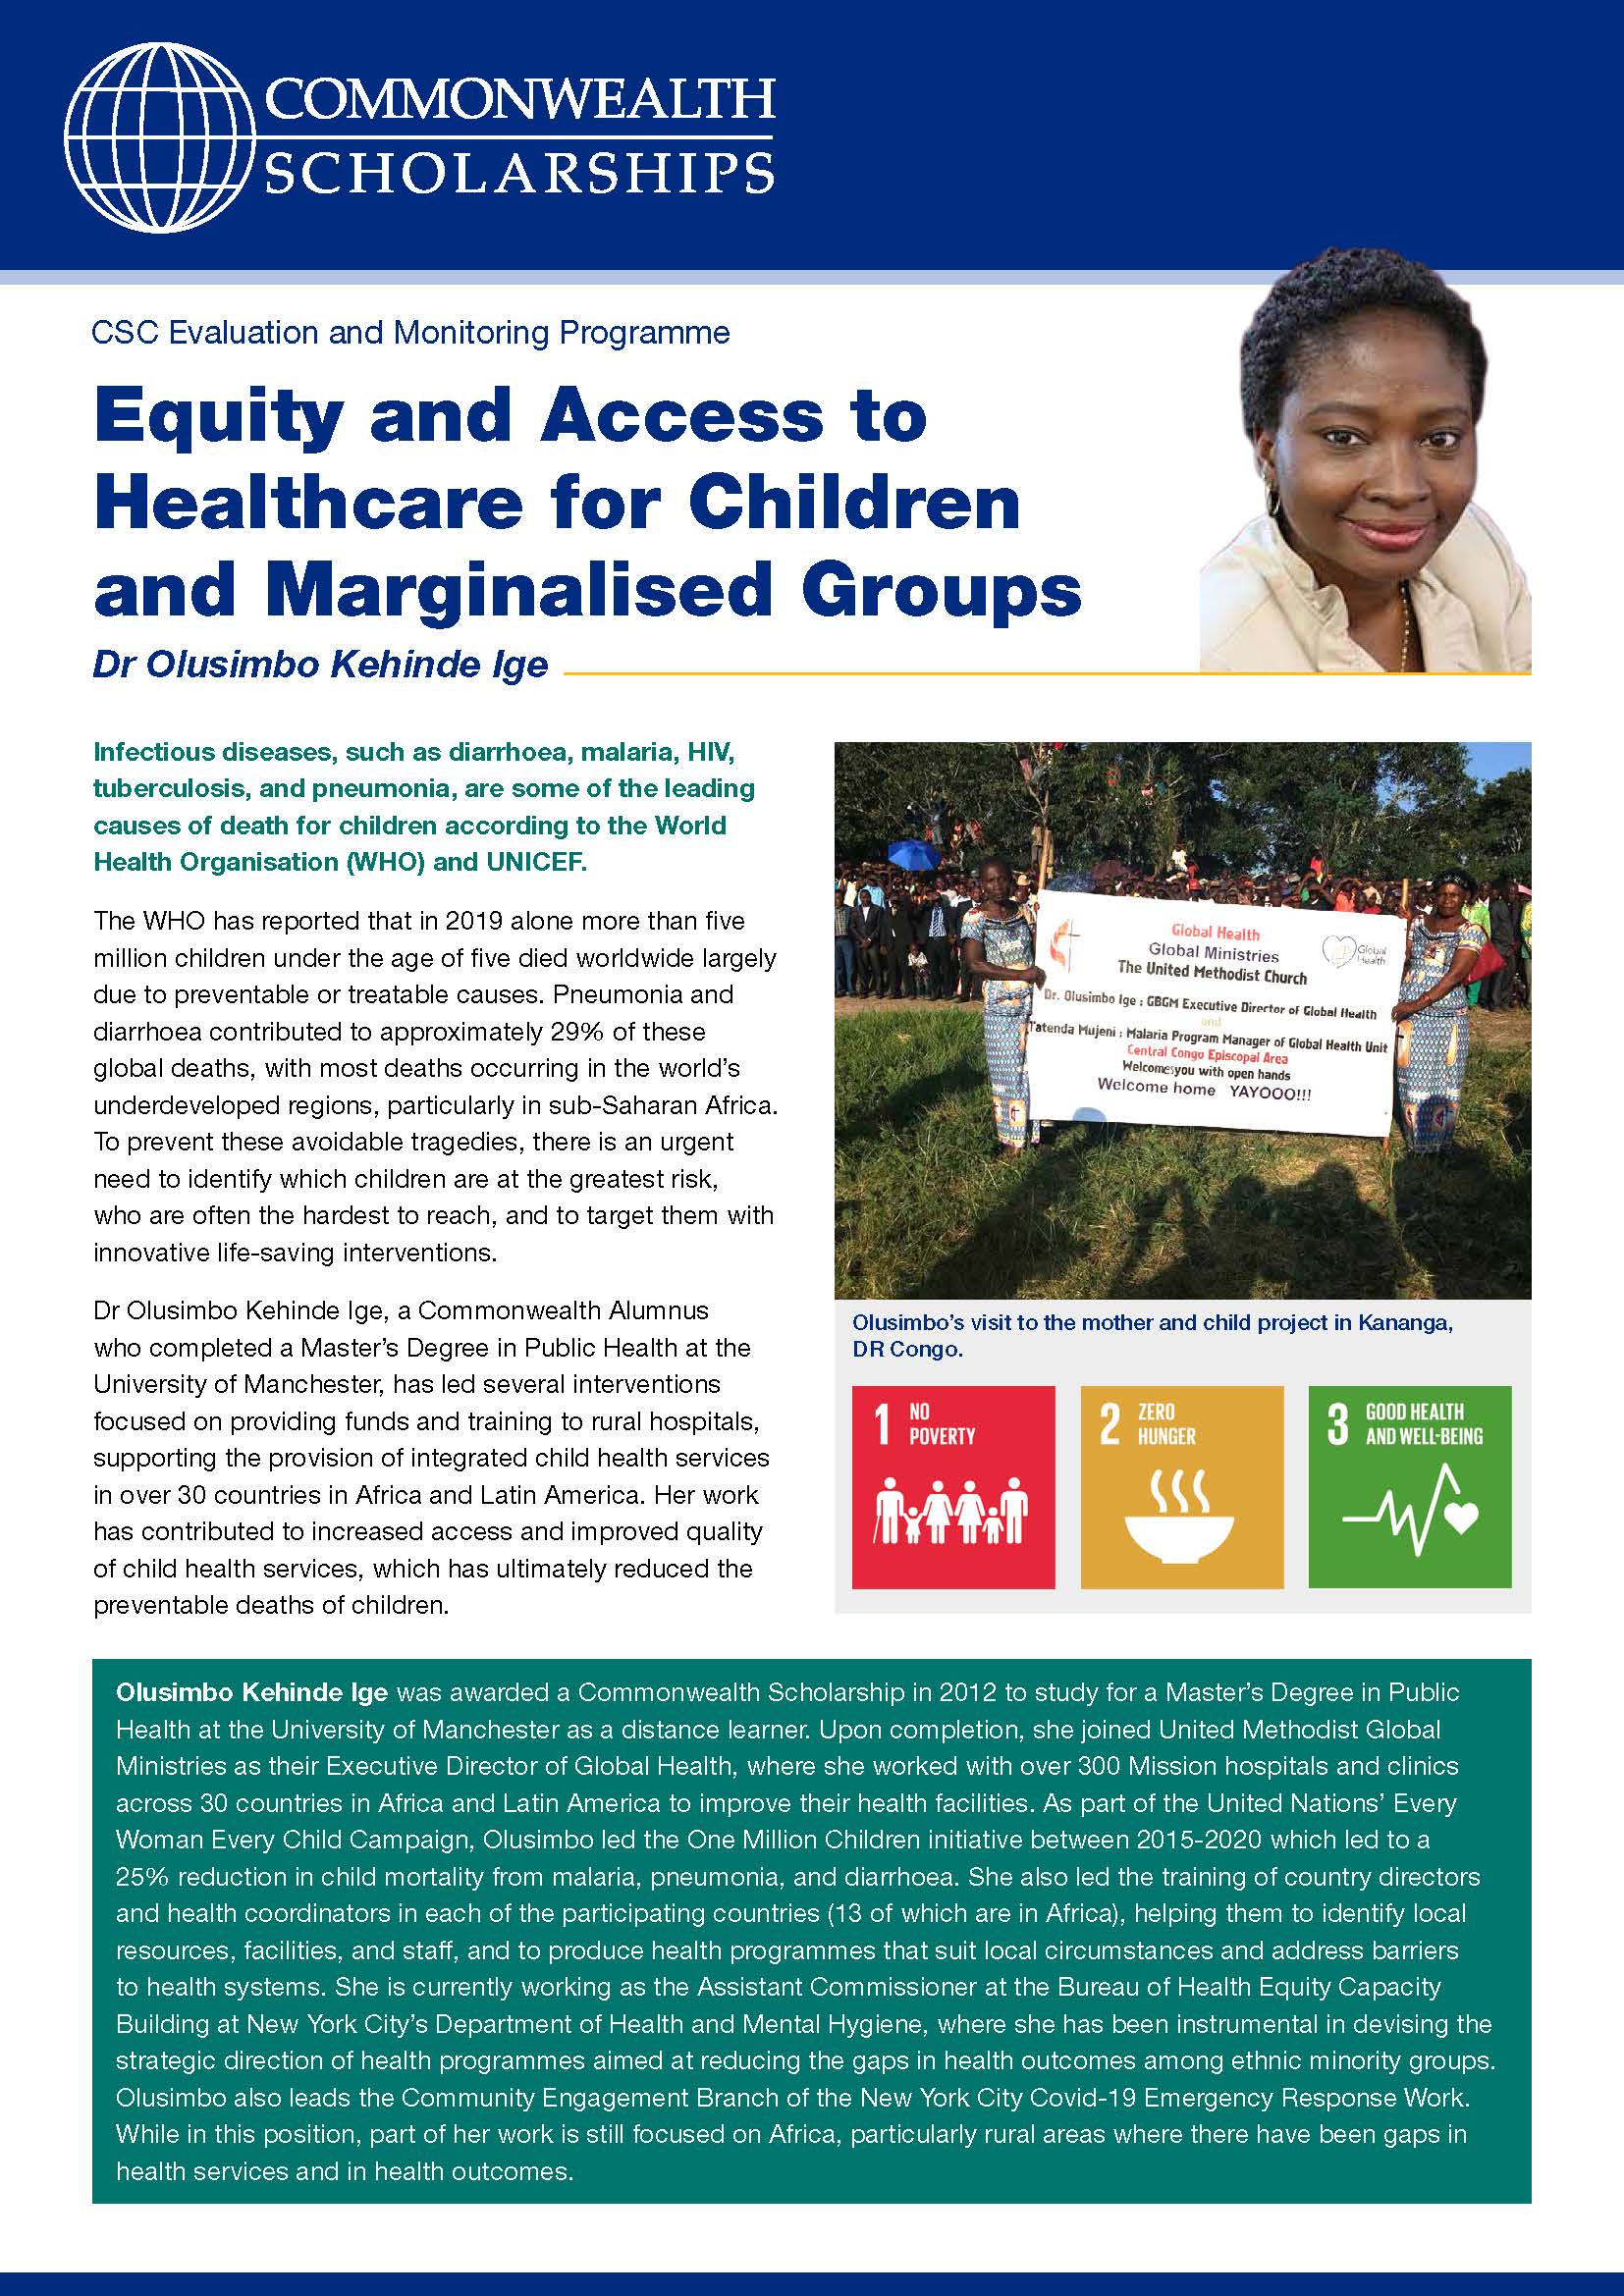 Read the Equity and Access to Healthcare for Children and Marginalised Groups case study